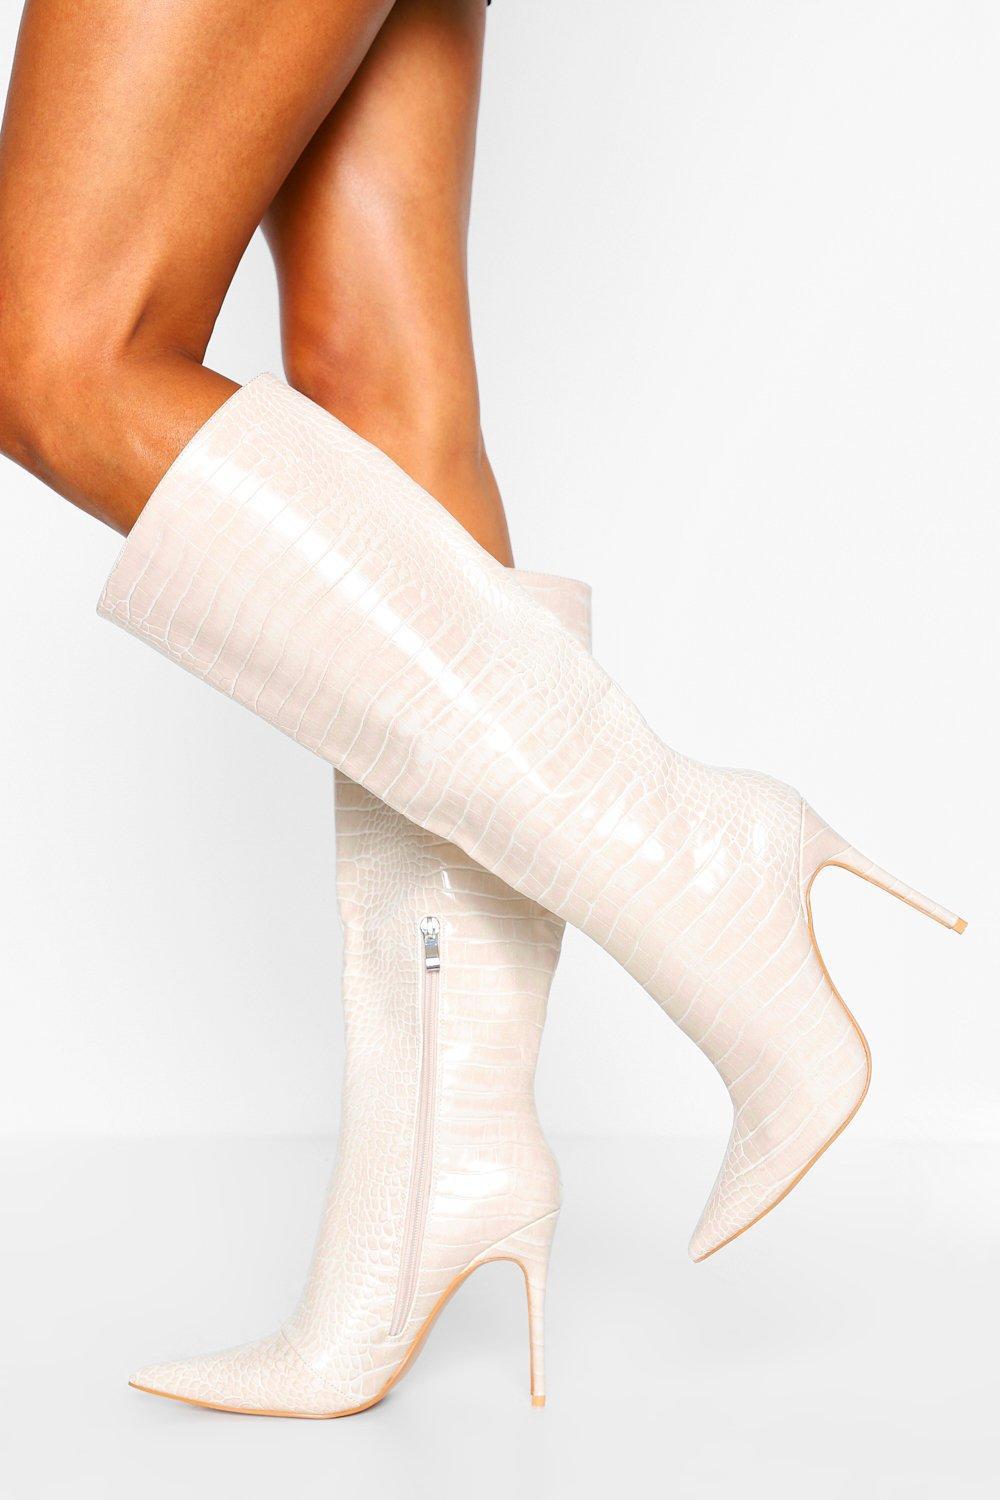 Boohoo Croc Pointed Toe Stiletto Heel Knee High Boots in White - Lyst